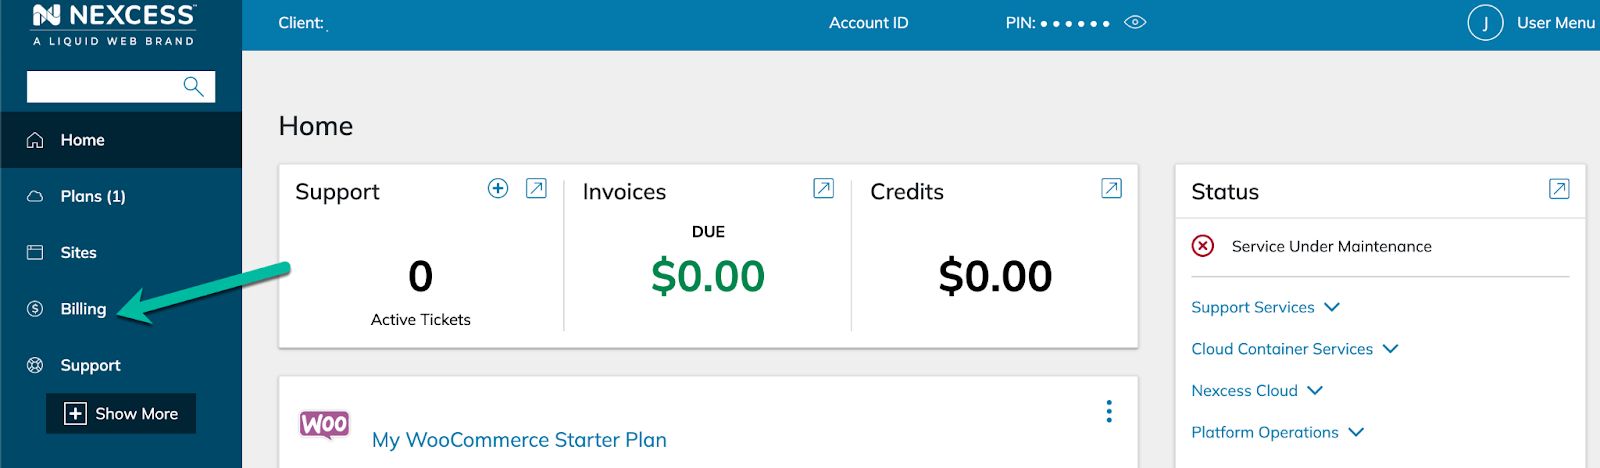 Or with just a couple clicks in the left-hand menu, you can see how to check your credit balance the slightly longer way! Click on Billing in the left-hand menu.